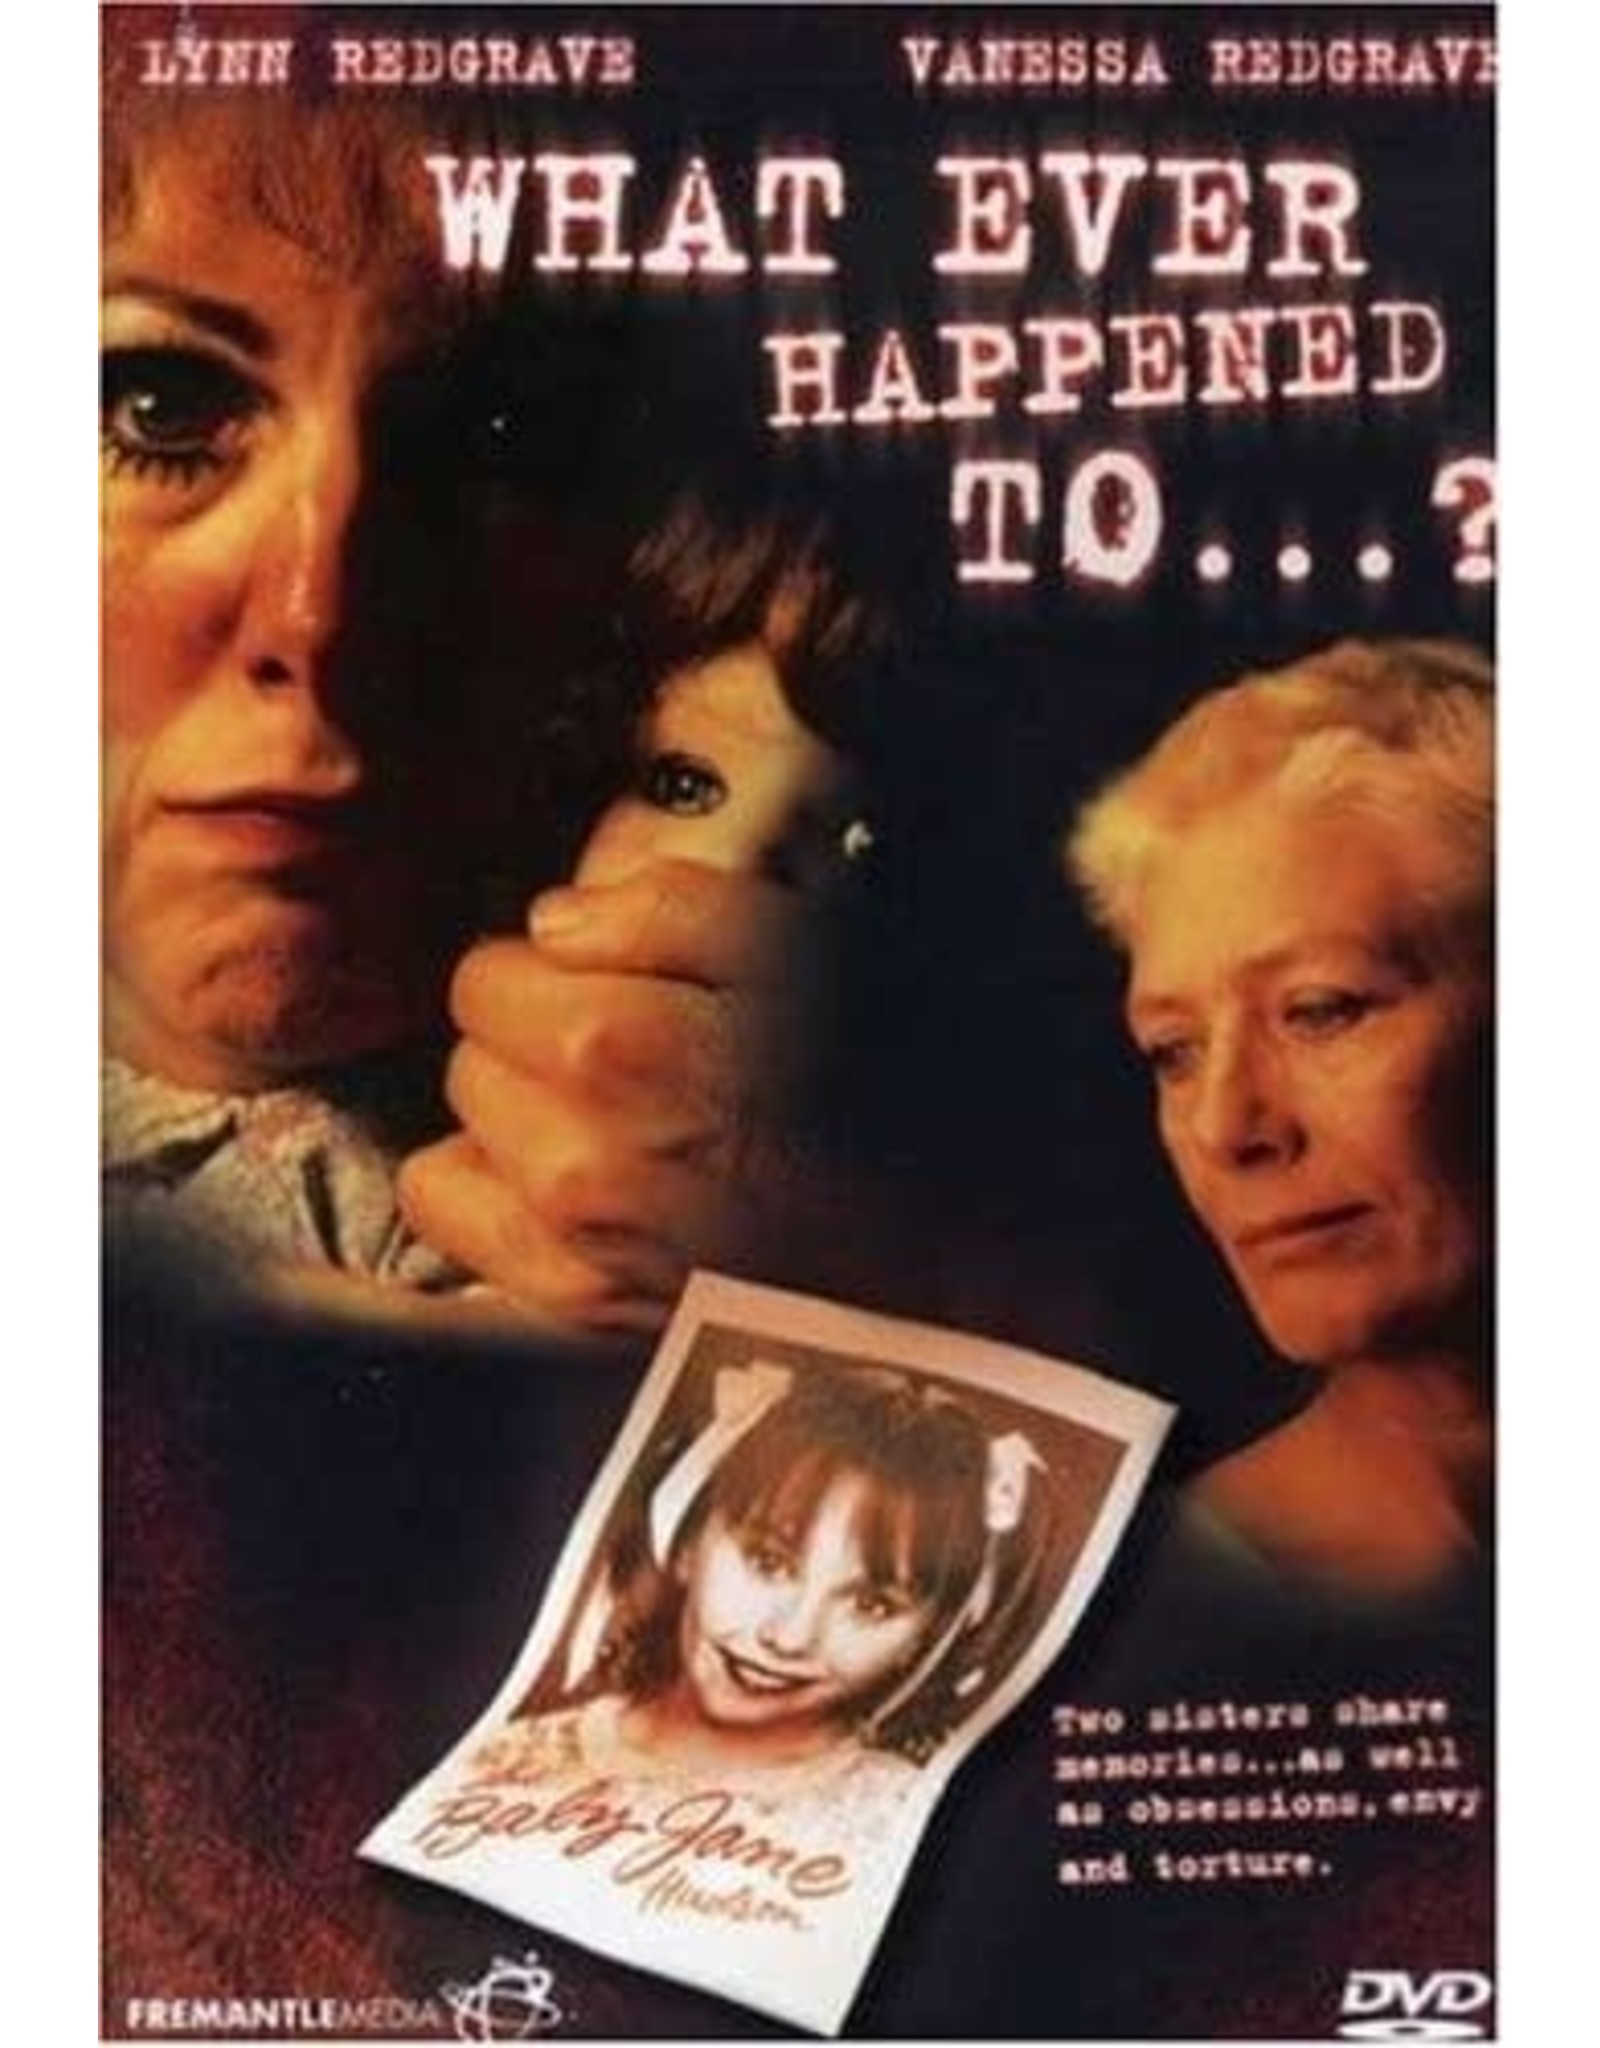 Horror Whatever Happened To...? 1990 (USED)